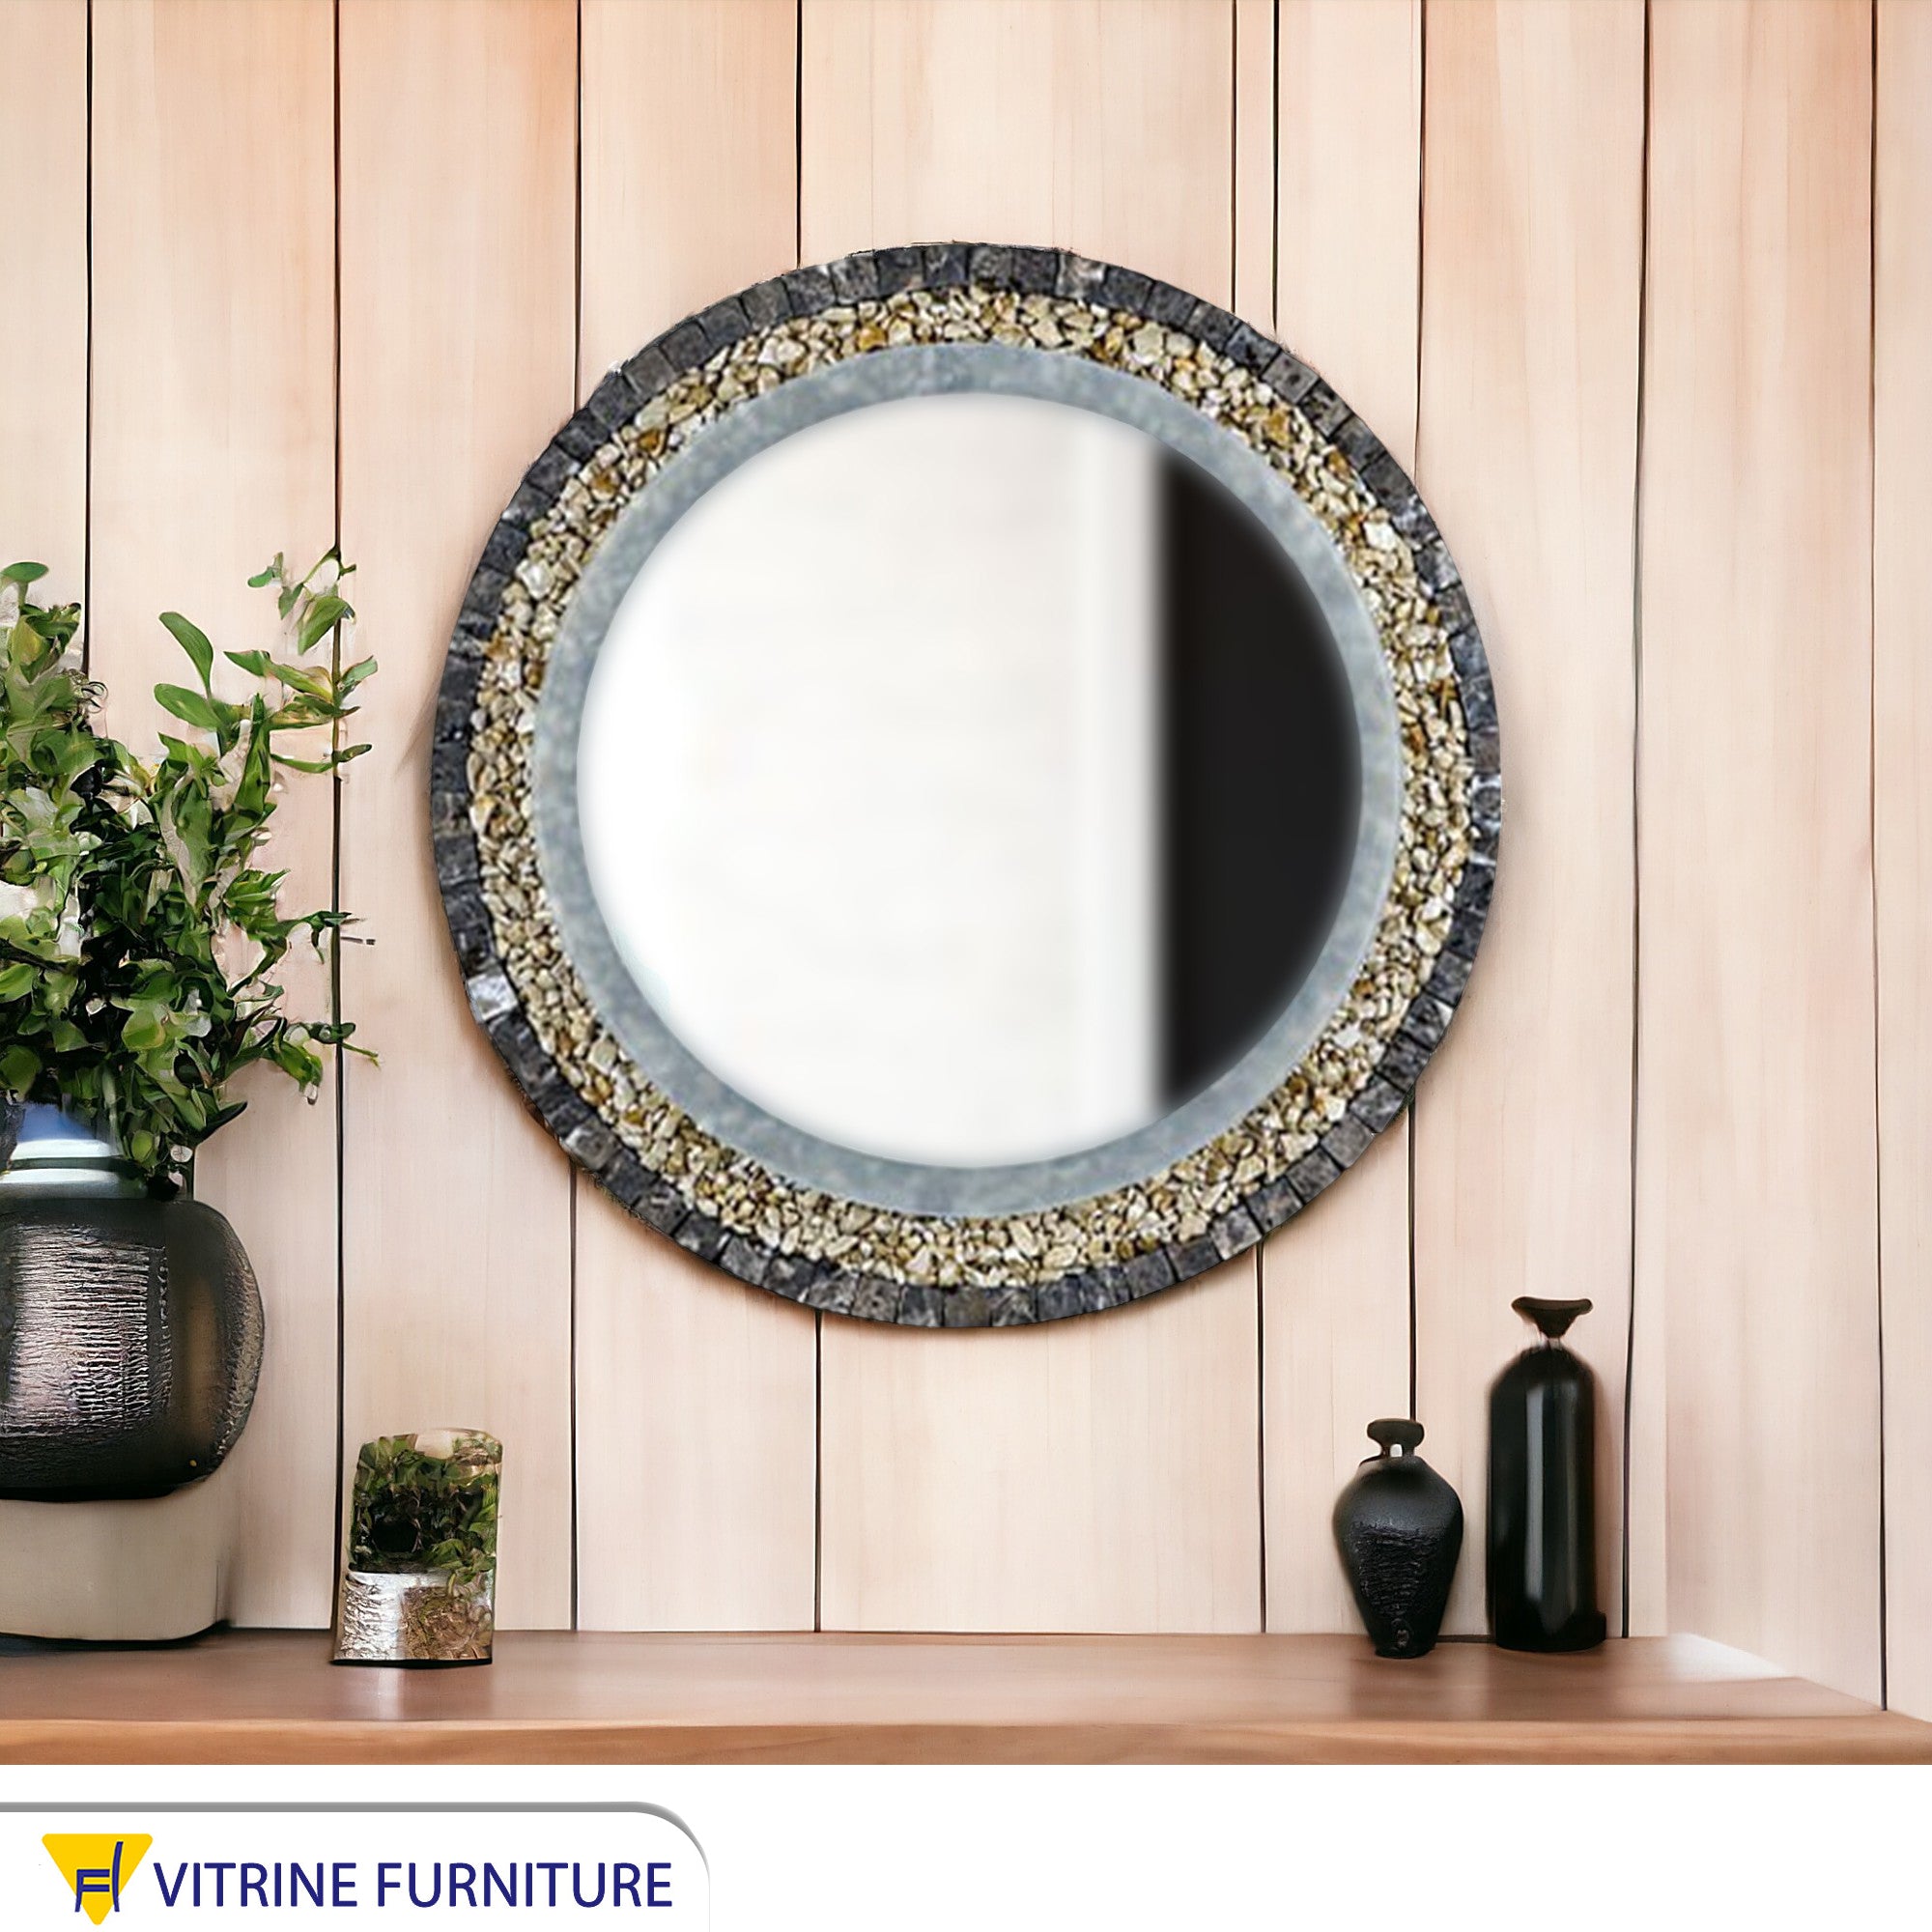 Circular mirror with black marble and stone frame